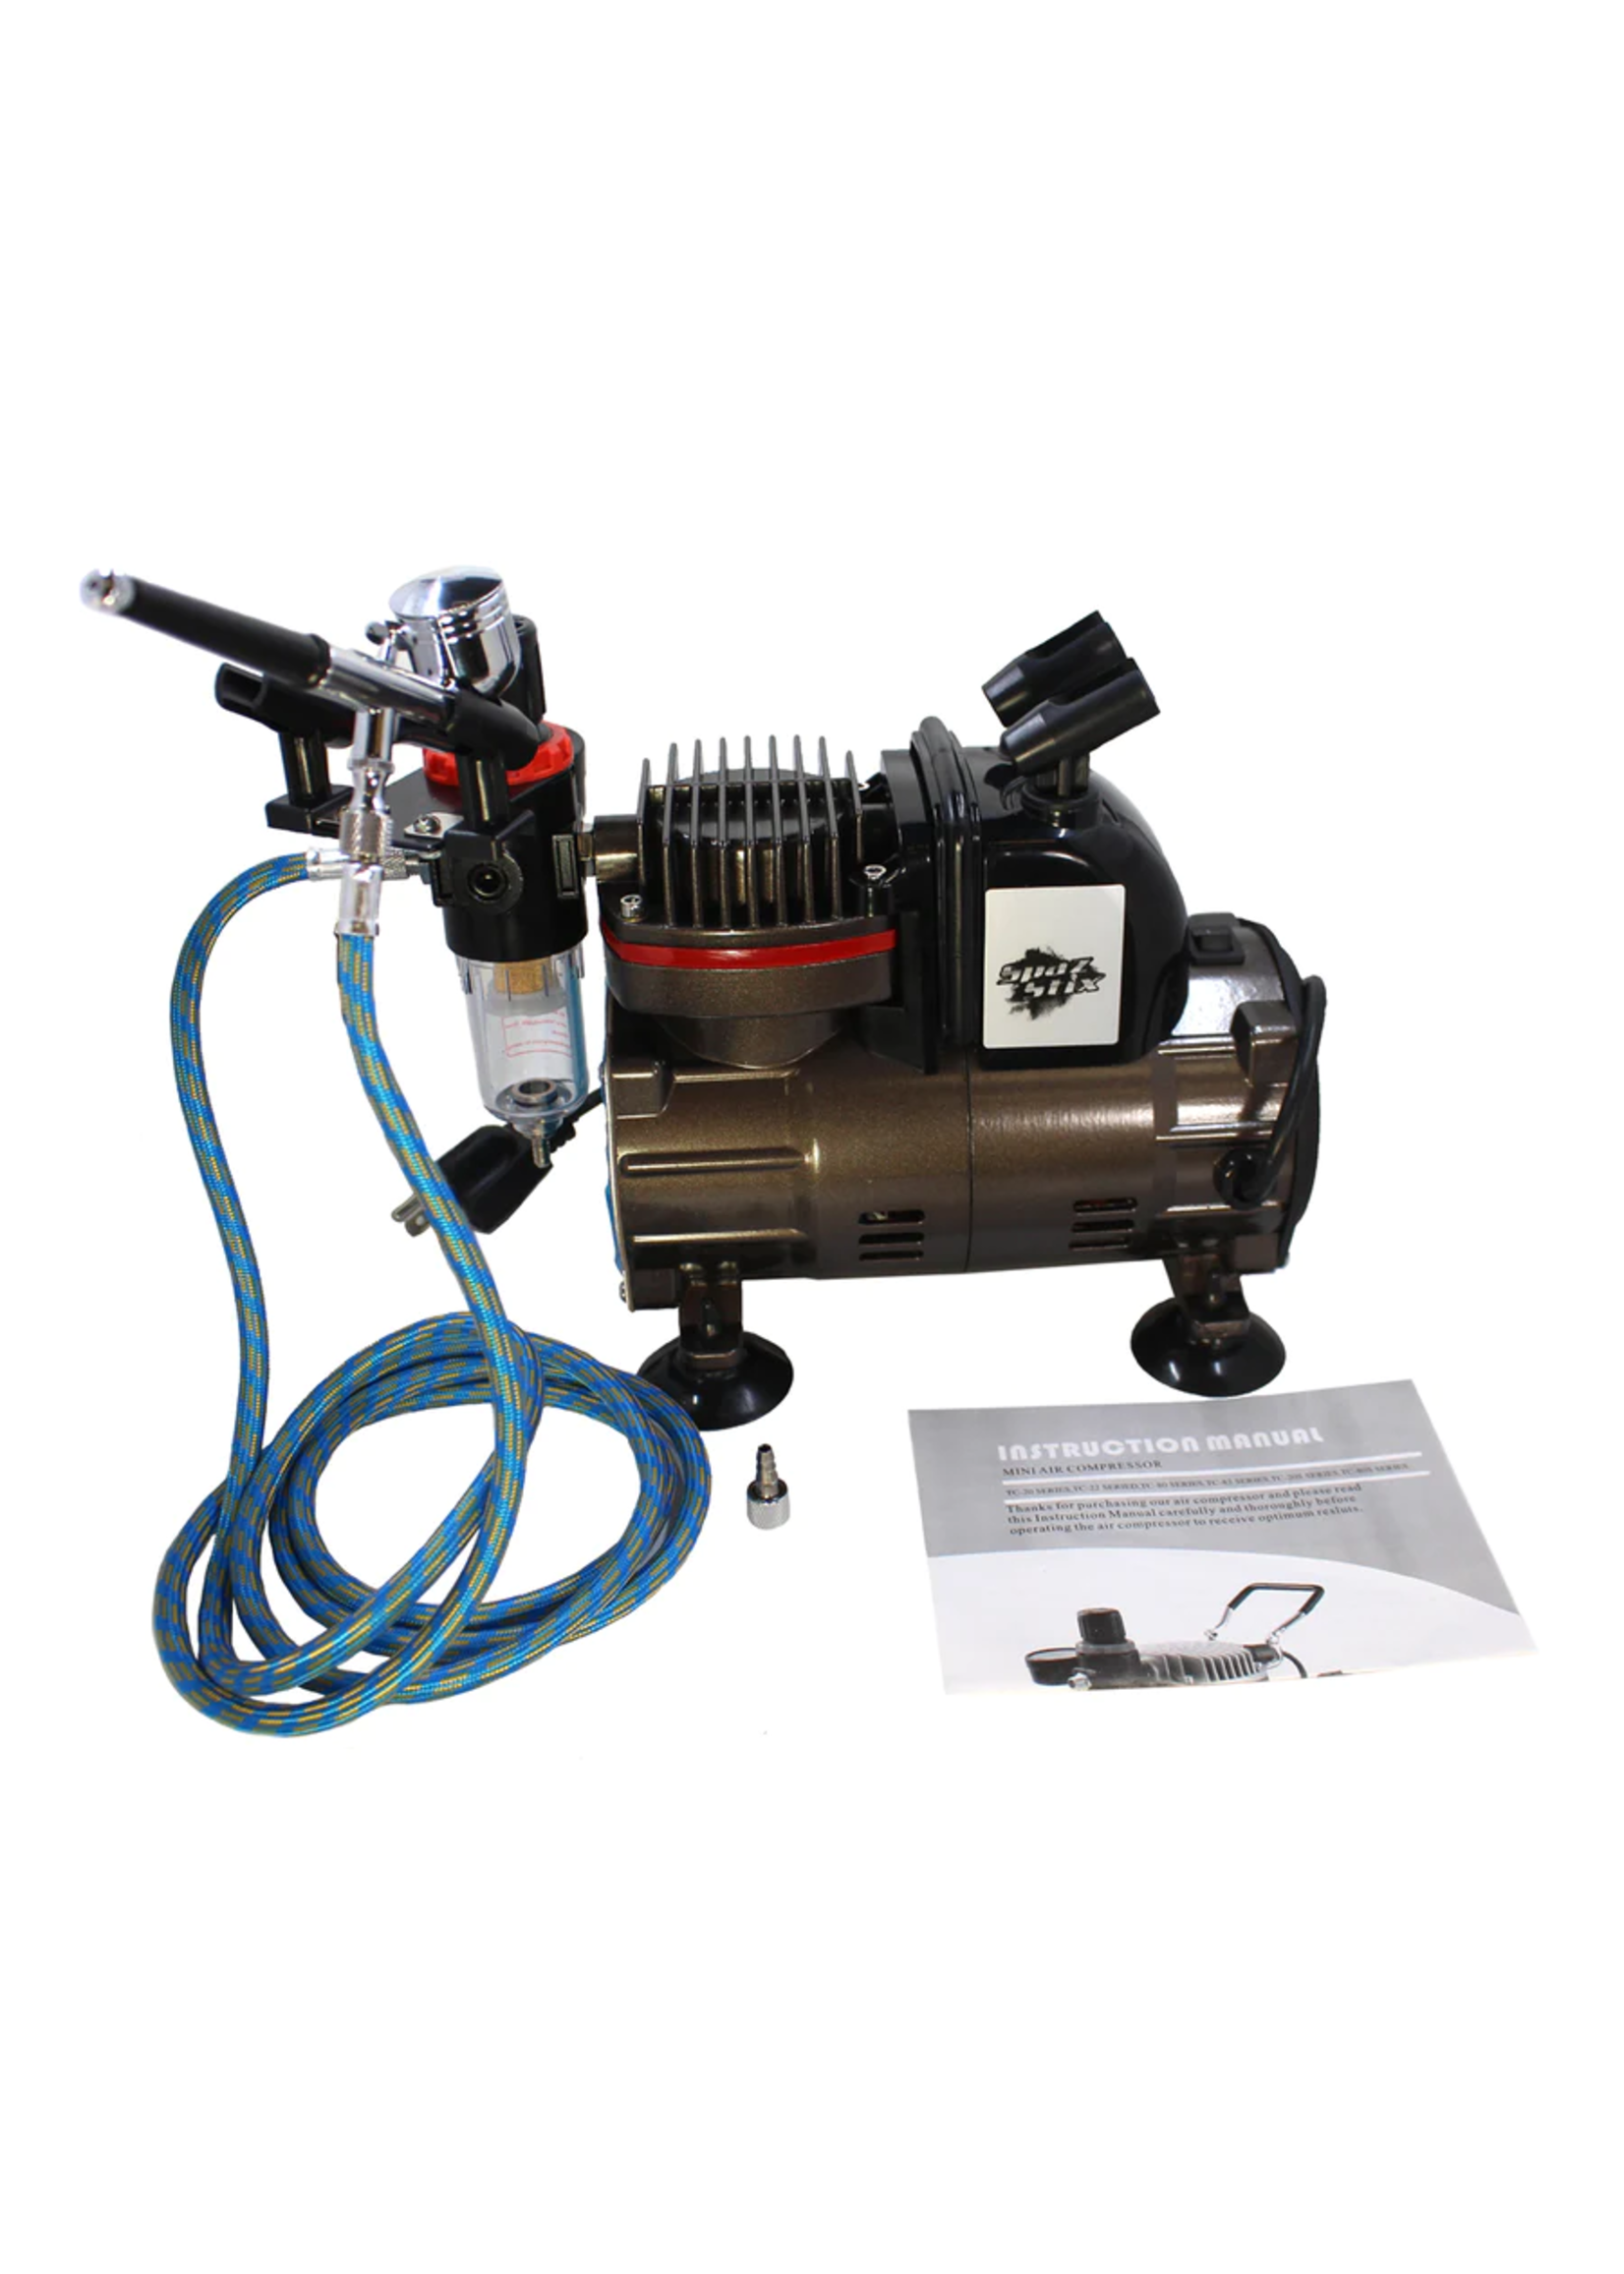 Spaz Stix - Dual Action Gravity Feed Airbrush & Air Compressor